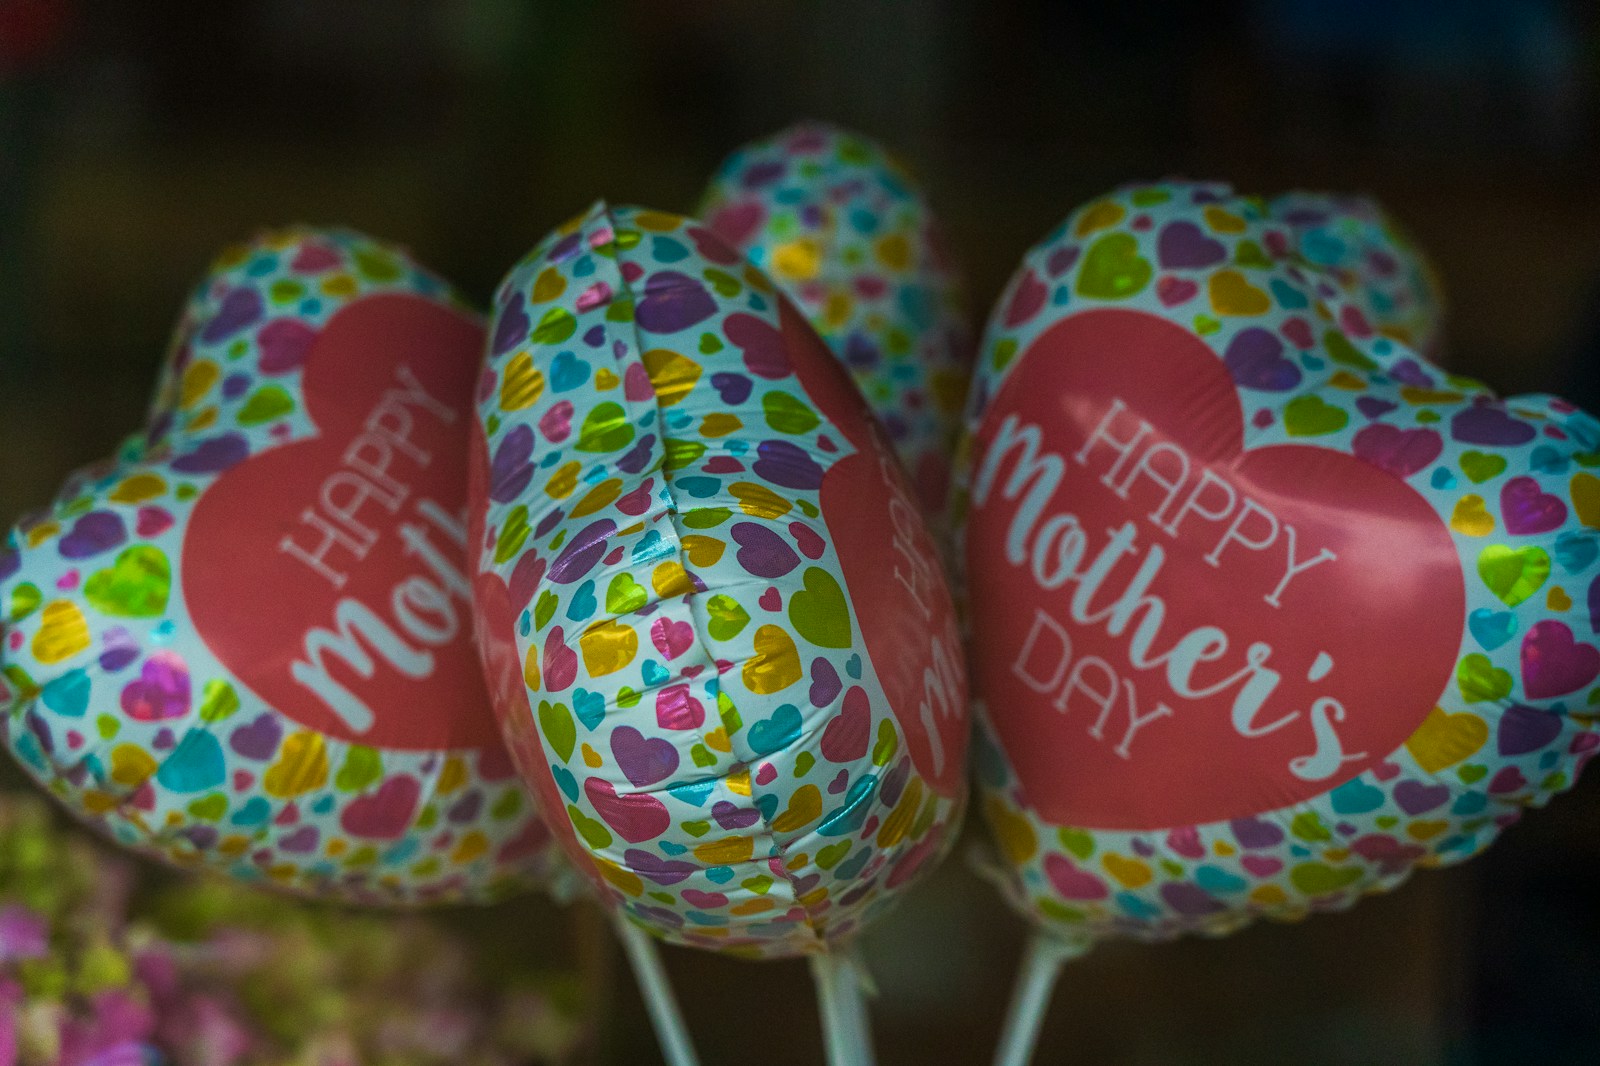 Happy Mother's Day from all of us at the Bettina Reid Group